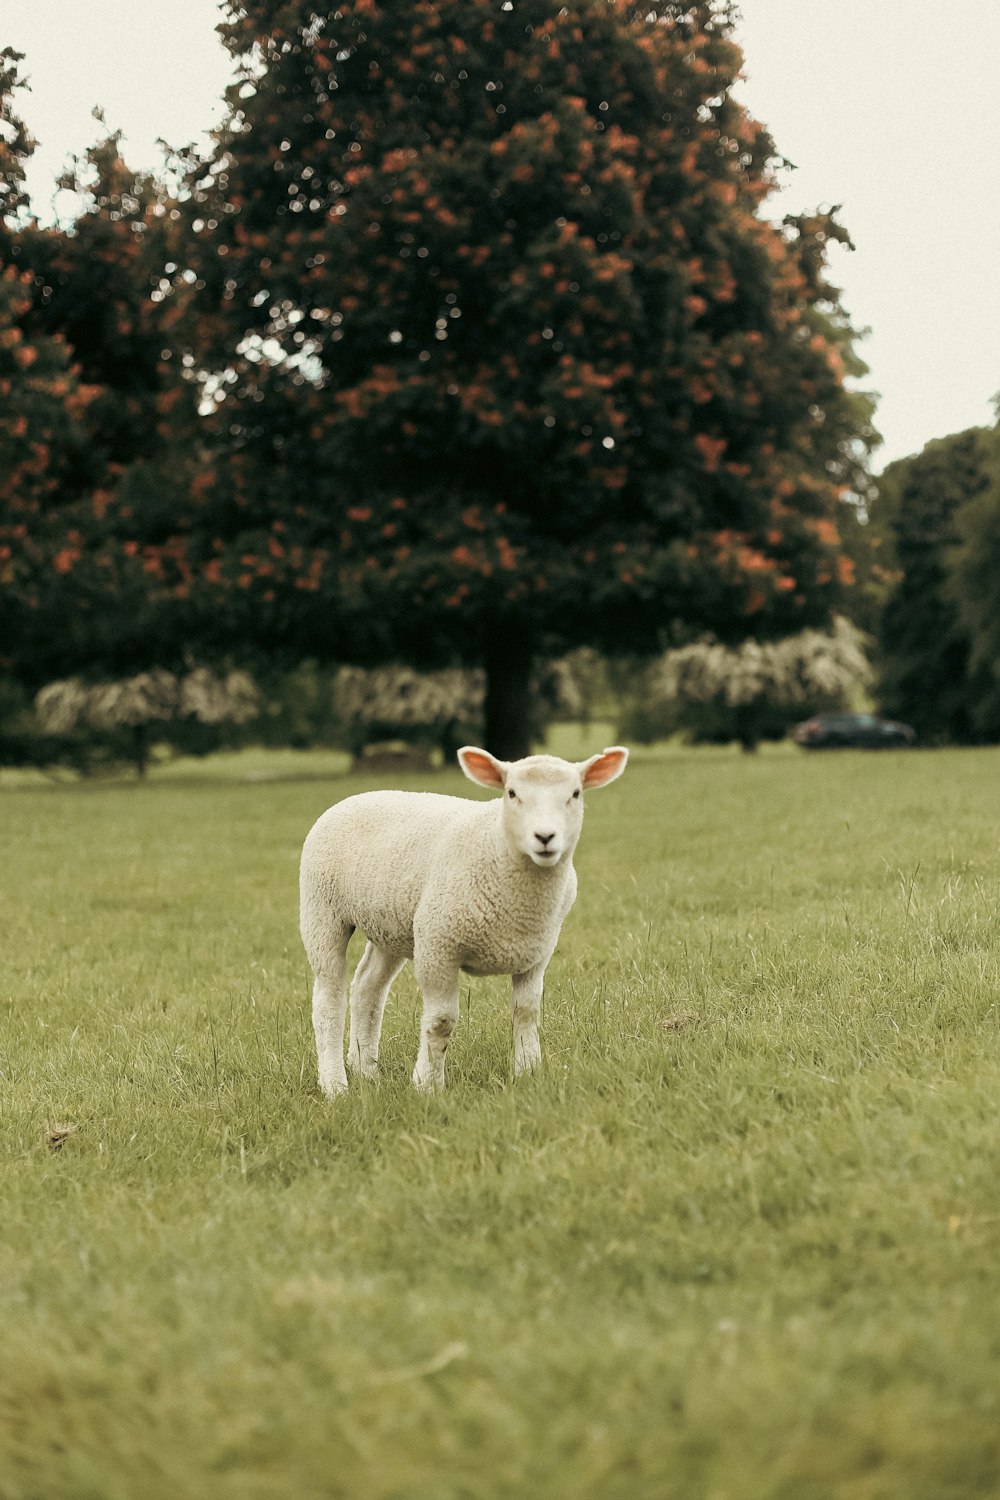 a sheep standing in a field with trees in the background